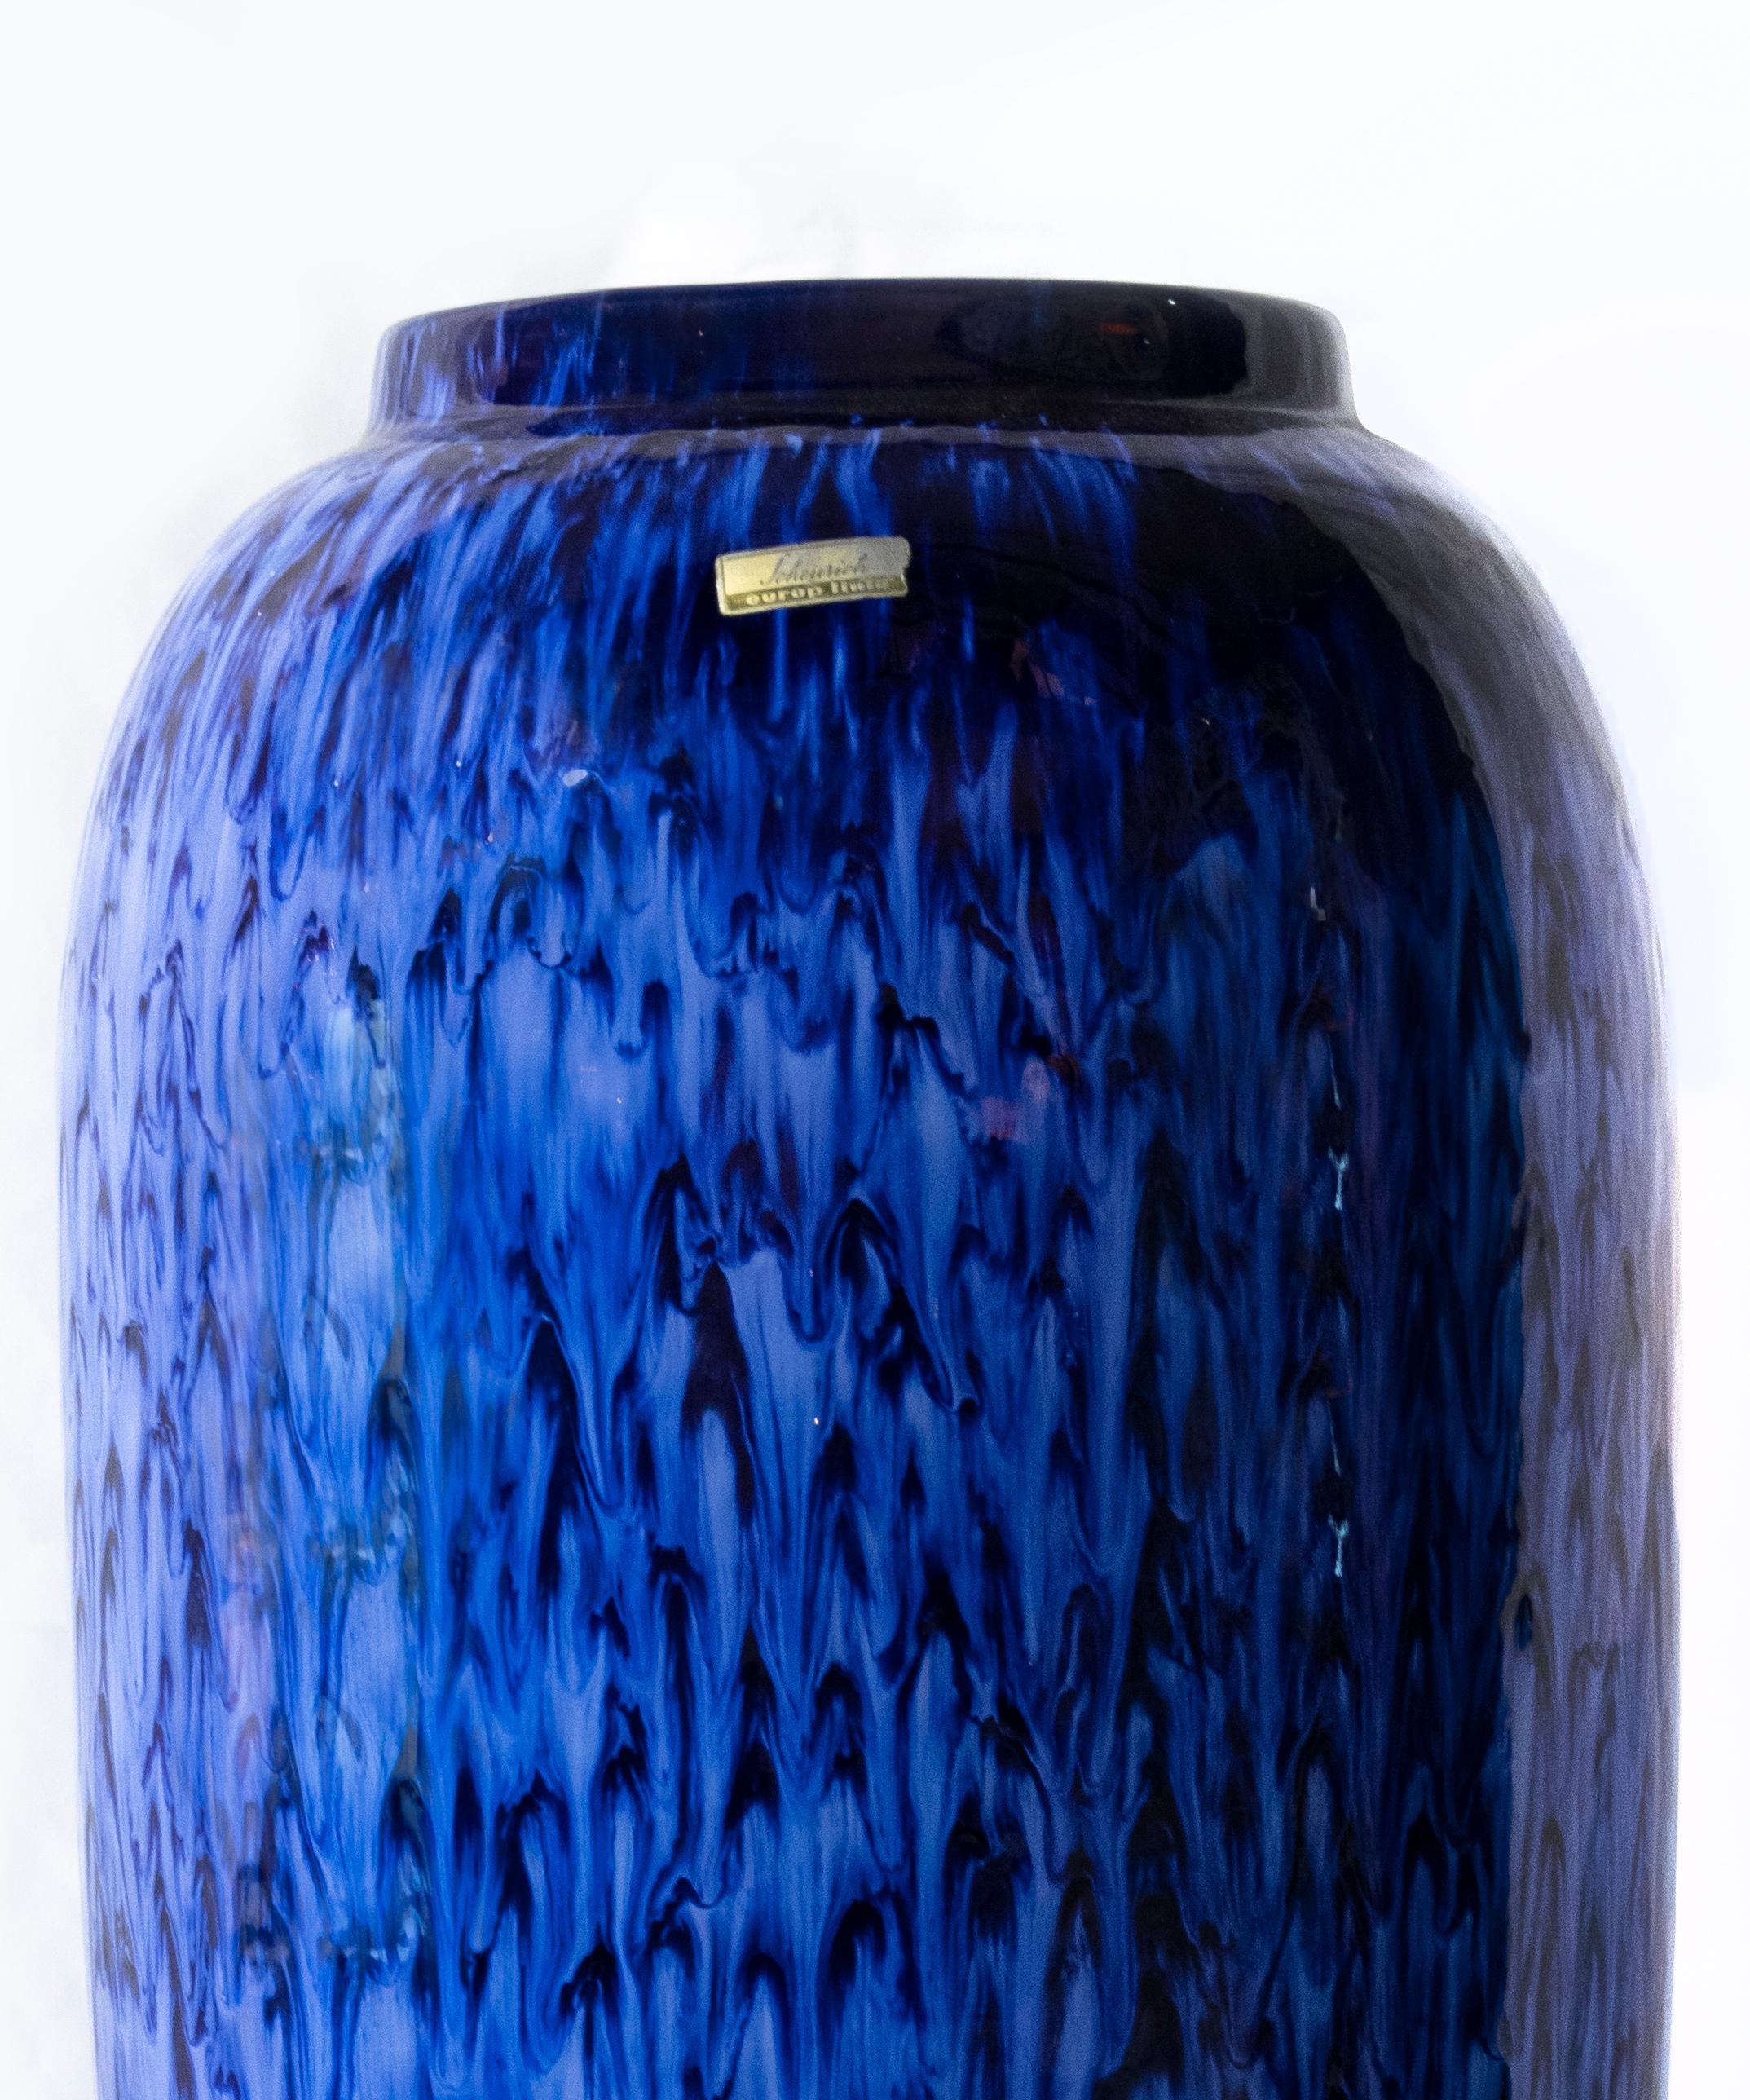 Scheurich vase is a wonderful blue colored vase realized by Scheurich.

Very good conditions.

Ceramic vase with label on side.

this is the perfect decorative object perfect for your house!

The Scheurich pot collection is the world's best